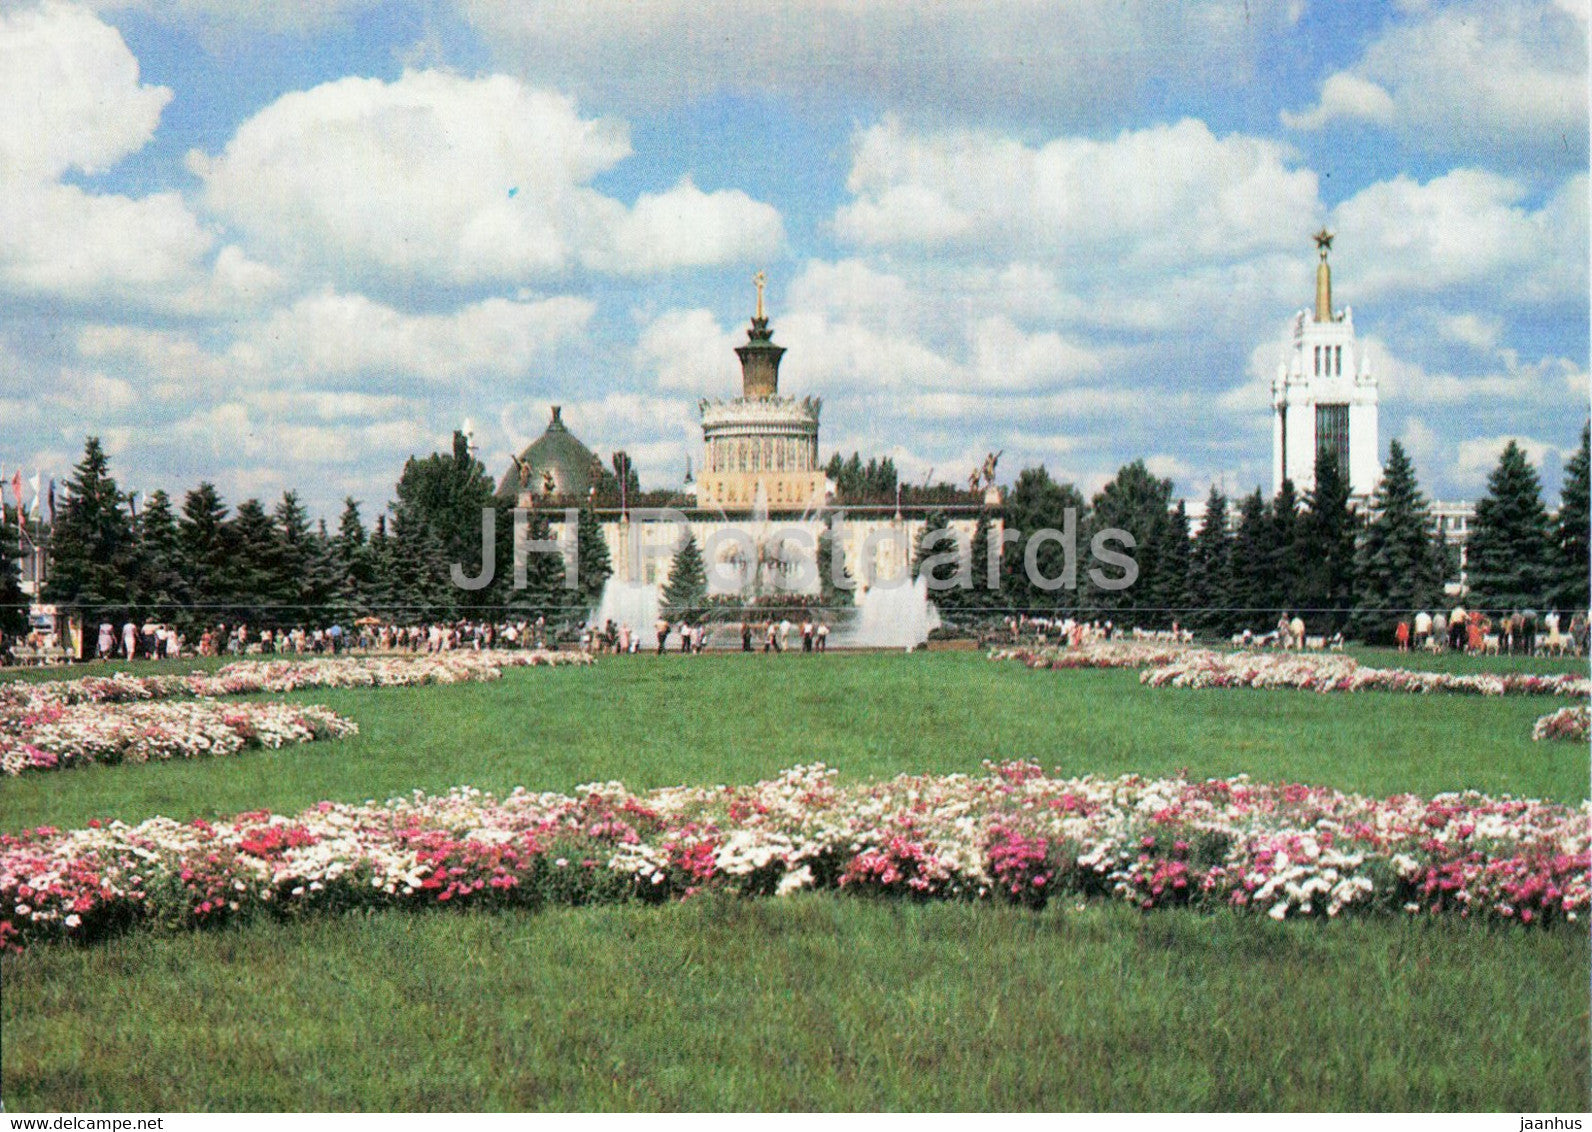 Moscow - The USSR National Economic Achievements Exhibition - 1986 - Russia USSR - unused - JH Postcards